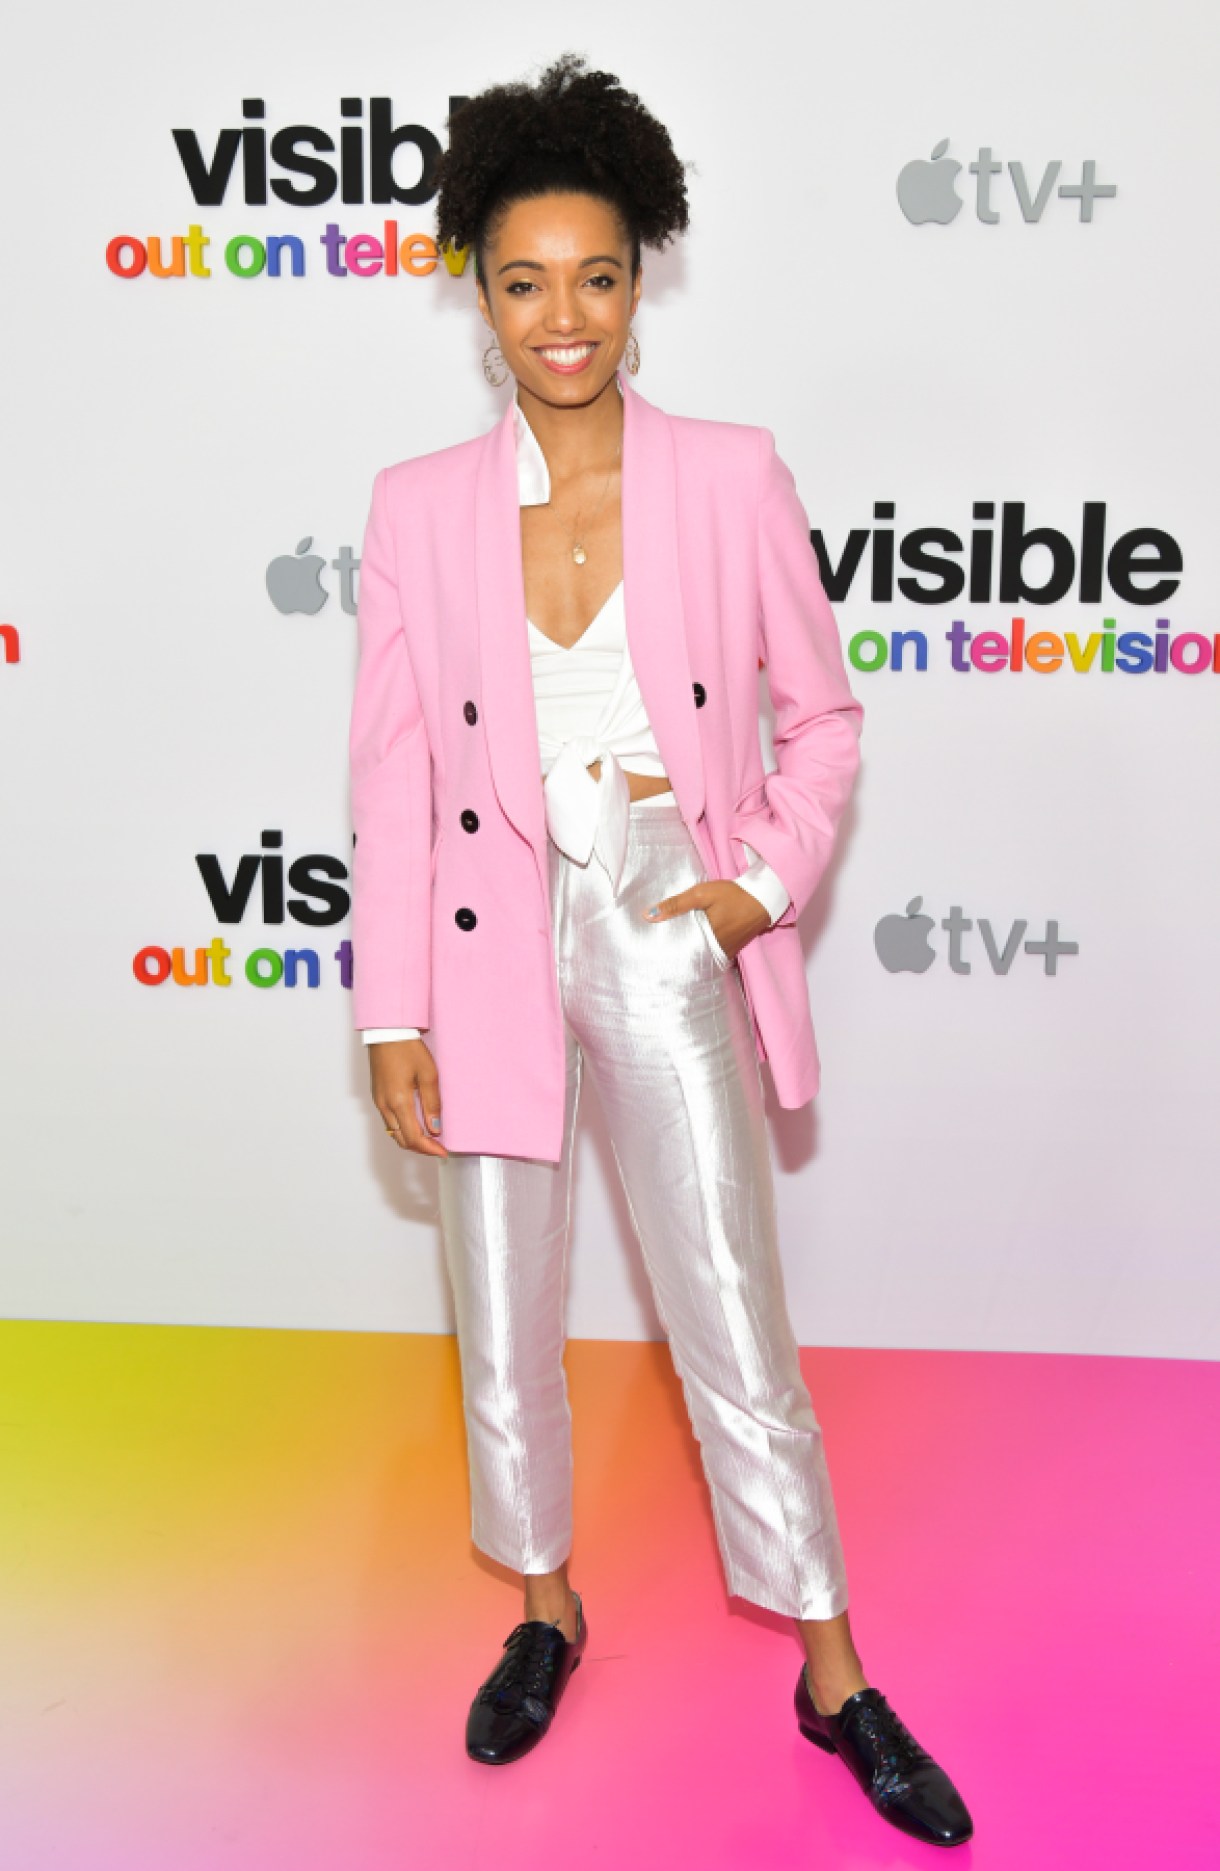 WEST HOLLYWOOD, CALIFORNIA - FEBRUARY 25: Maisie Richardson-Sellers attends the LA Special Screening of Apple TV+'s "Visible: Out On Television" at The West Hollywood EDITION on February 25, 2020 in West Hollywood, California. (Photo by Rodin Eckenroth/Getty Images)